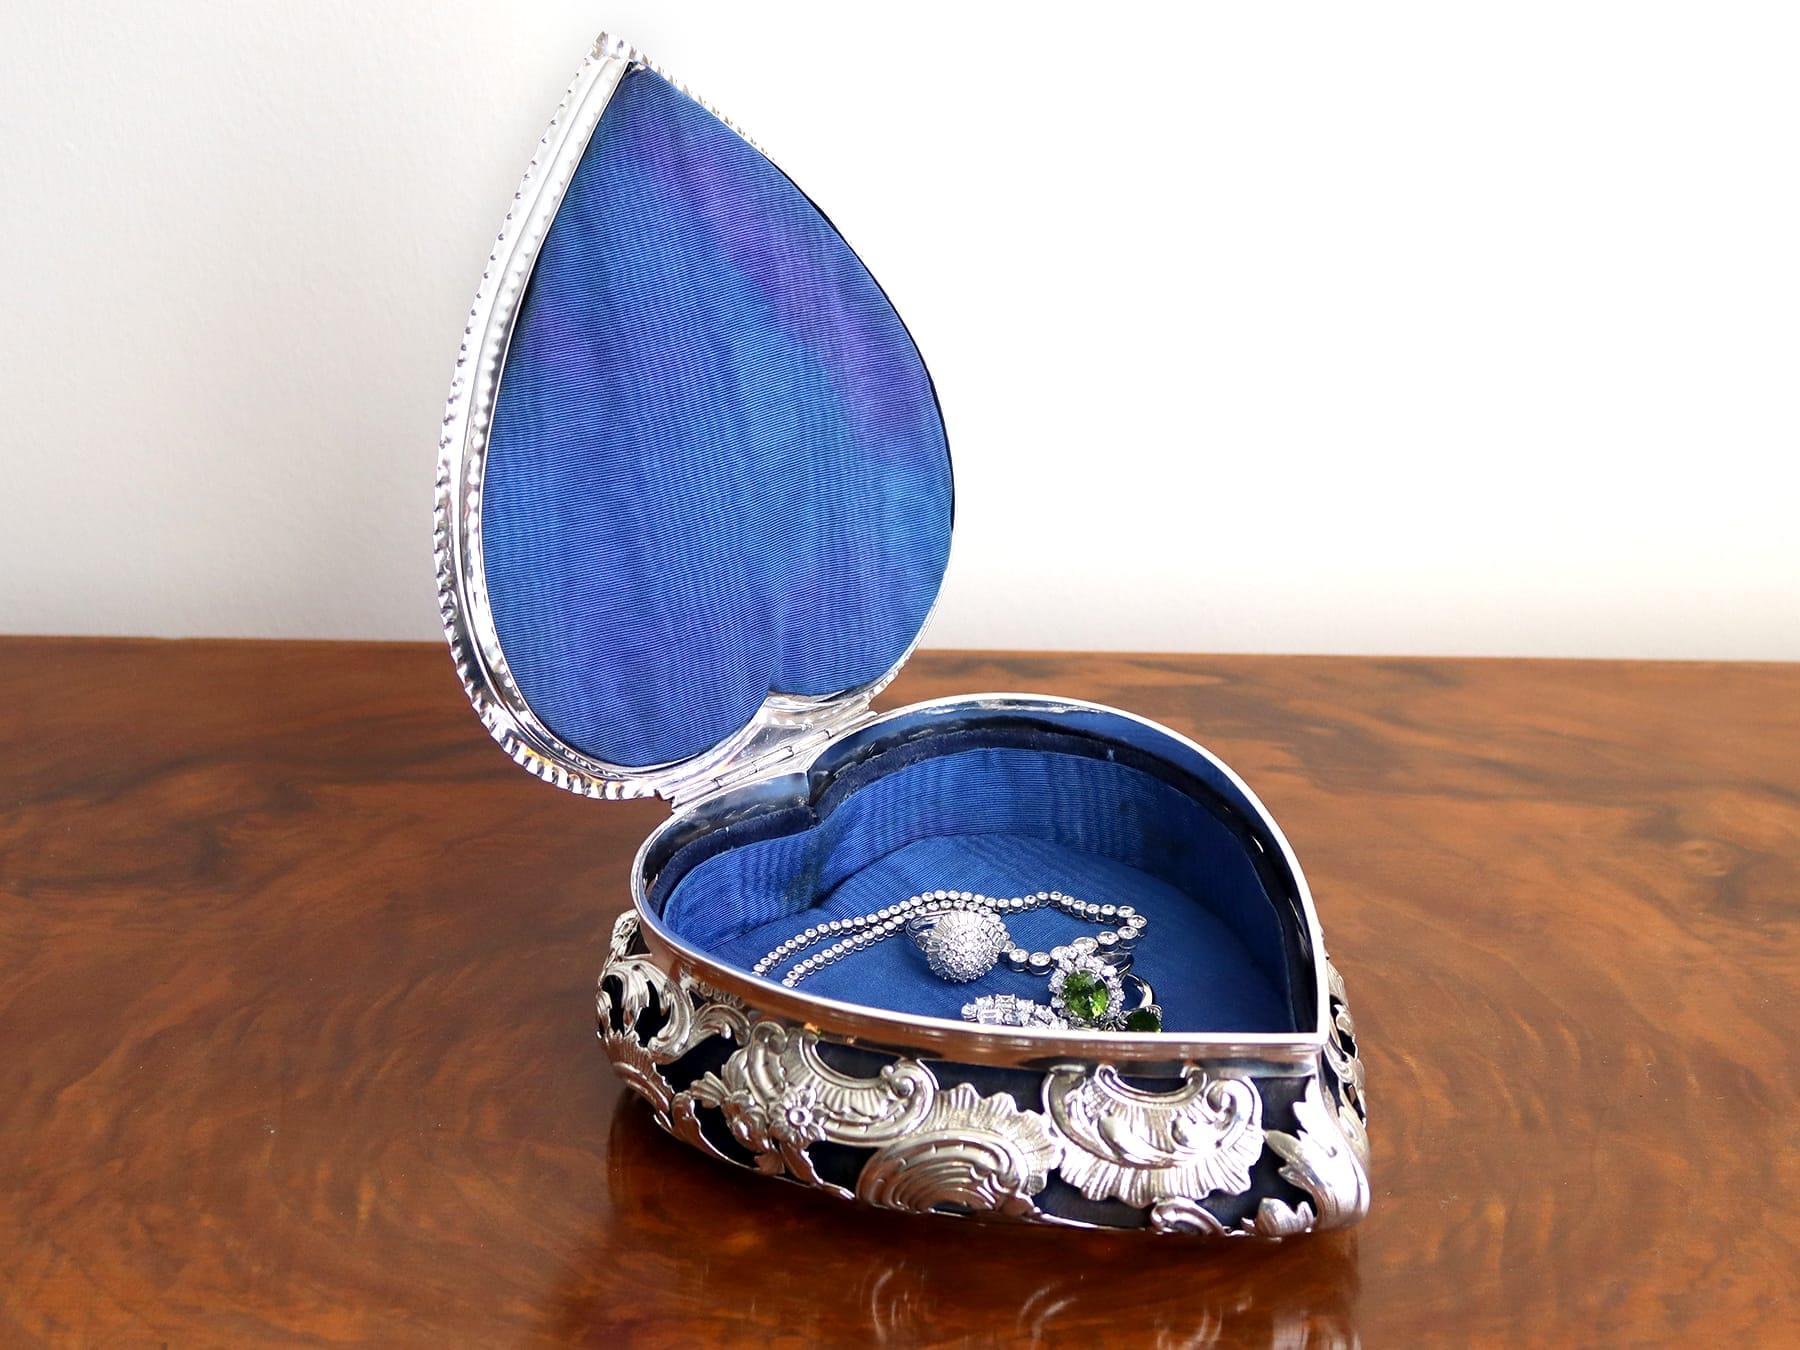 Antique Victorian Sterling Silver Heart Jewellery Box (1889) In Excellent Condition For Sale In Jesmond, Newcastle Upon Tyne